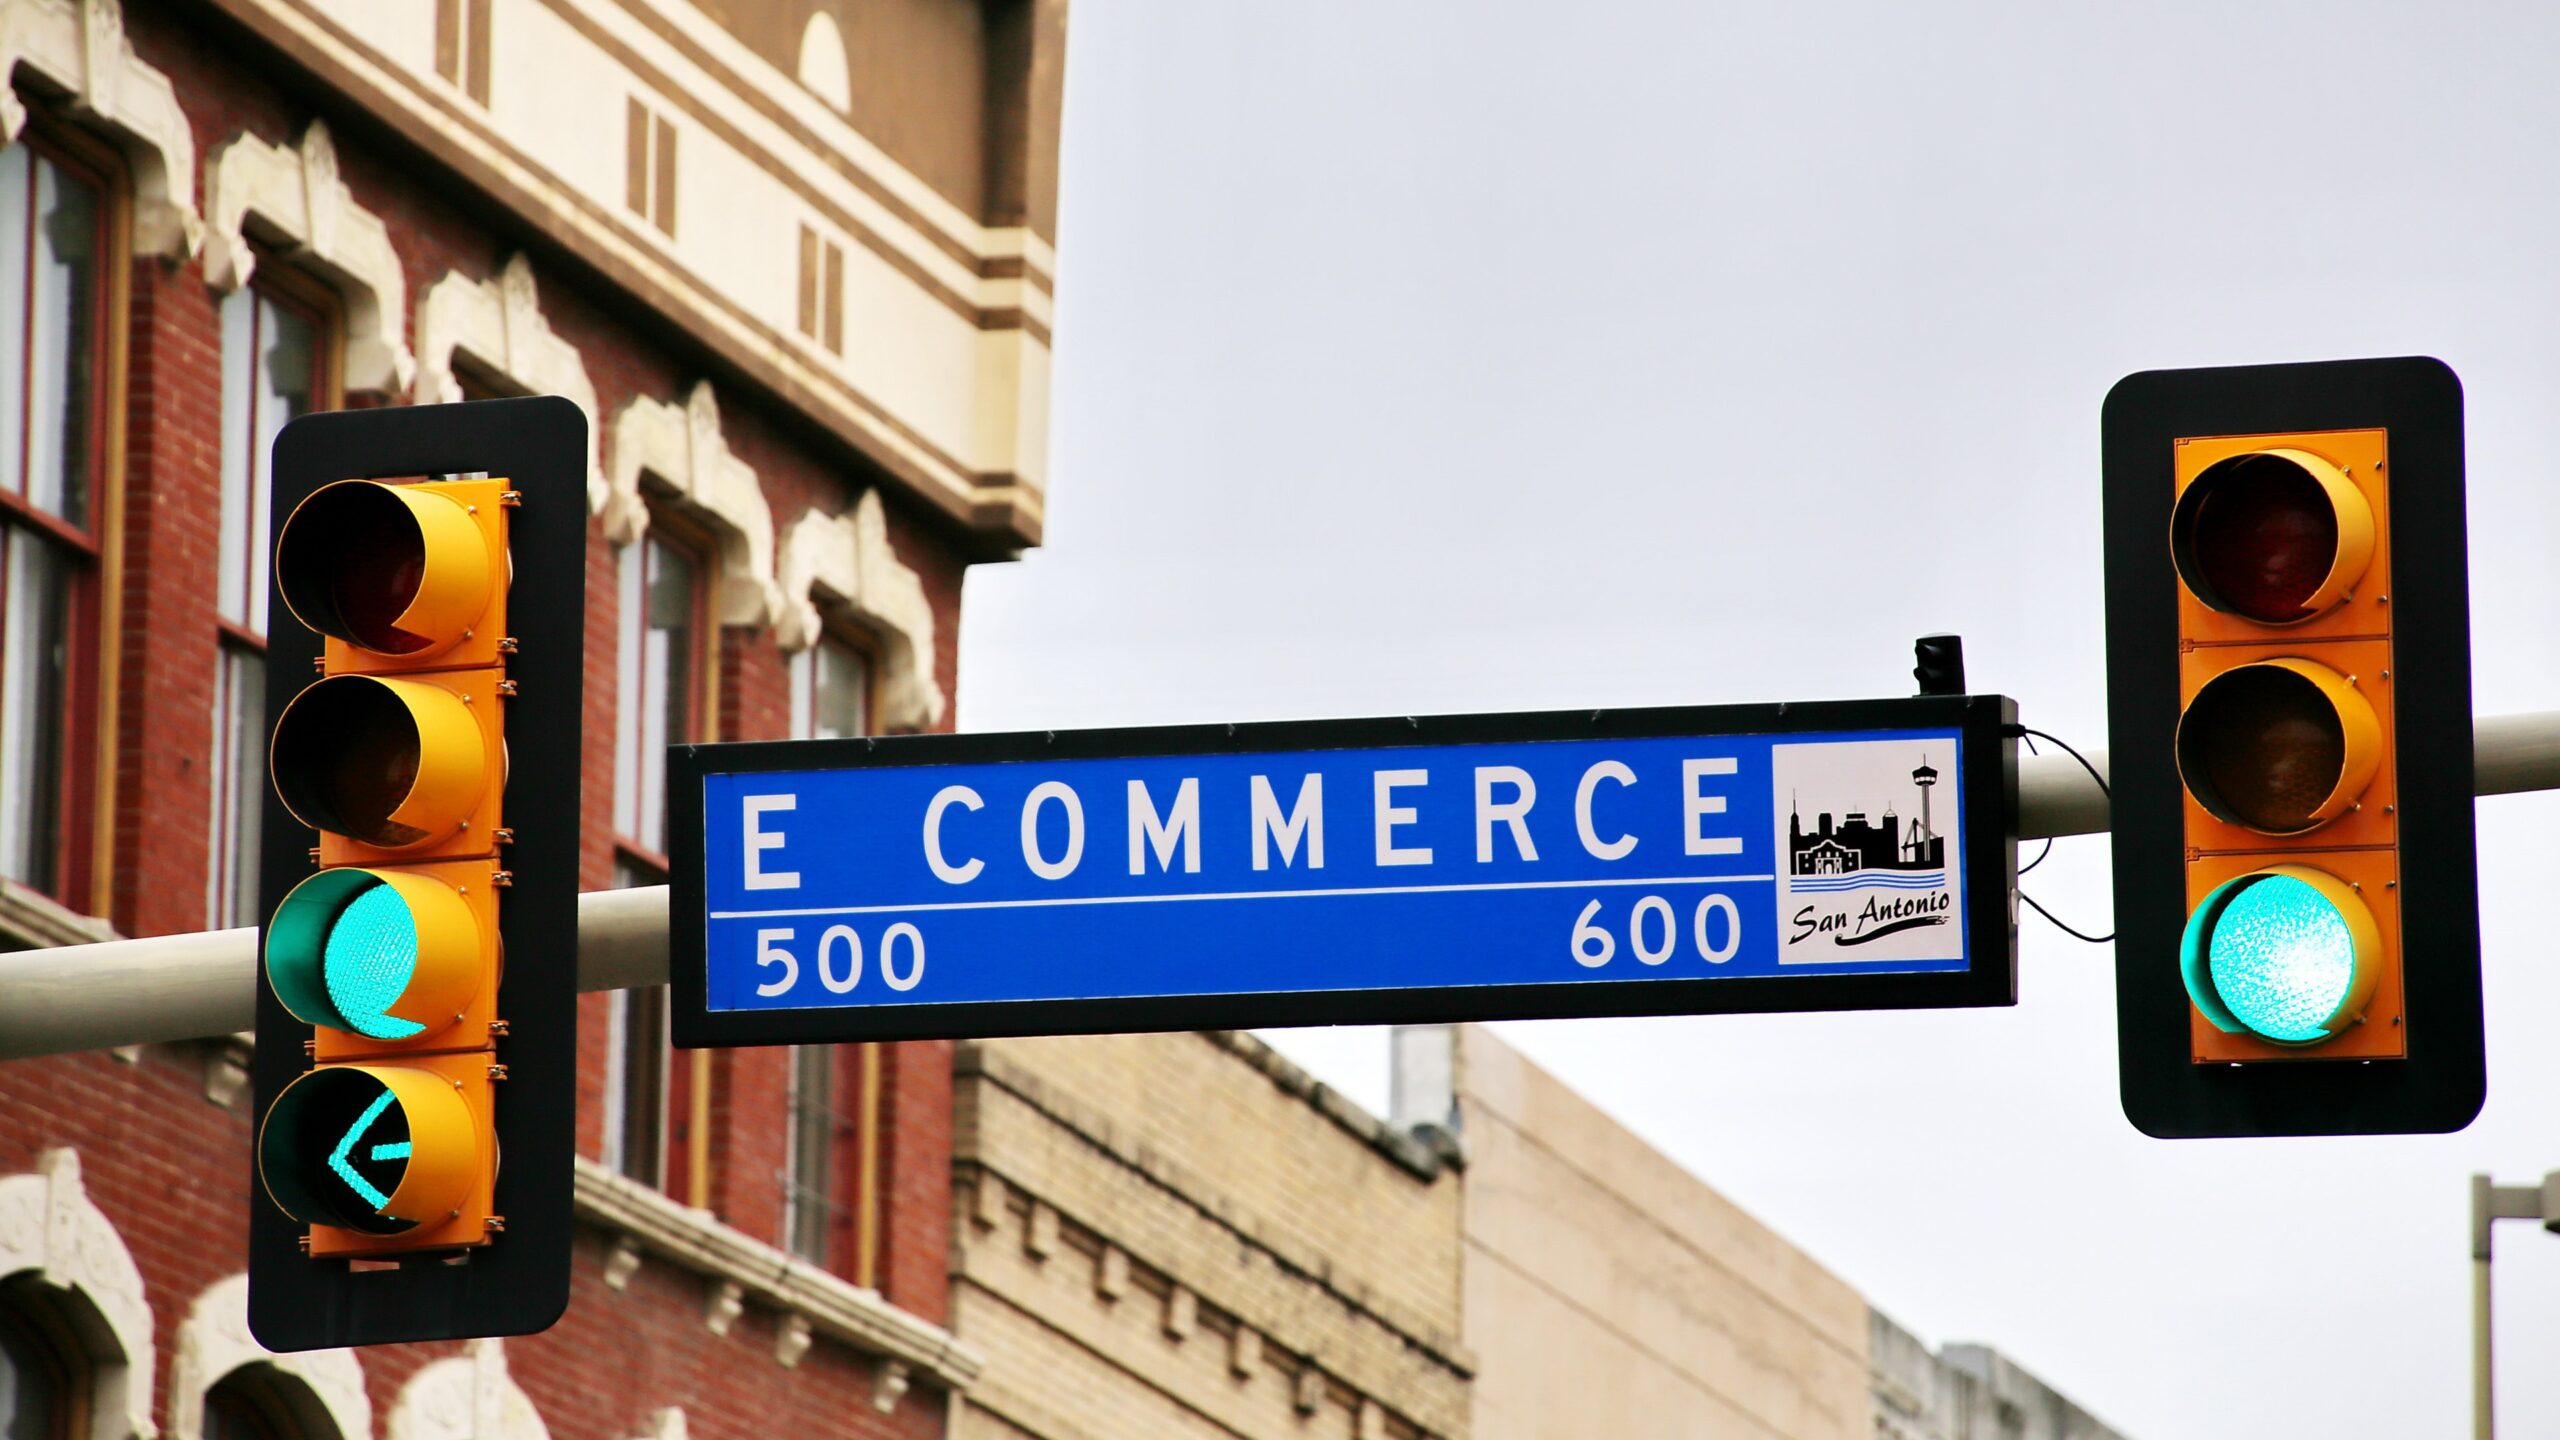 a street sign suspended between two stoplights reads "E commerce"